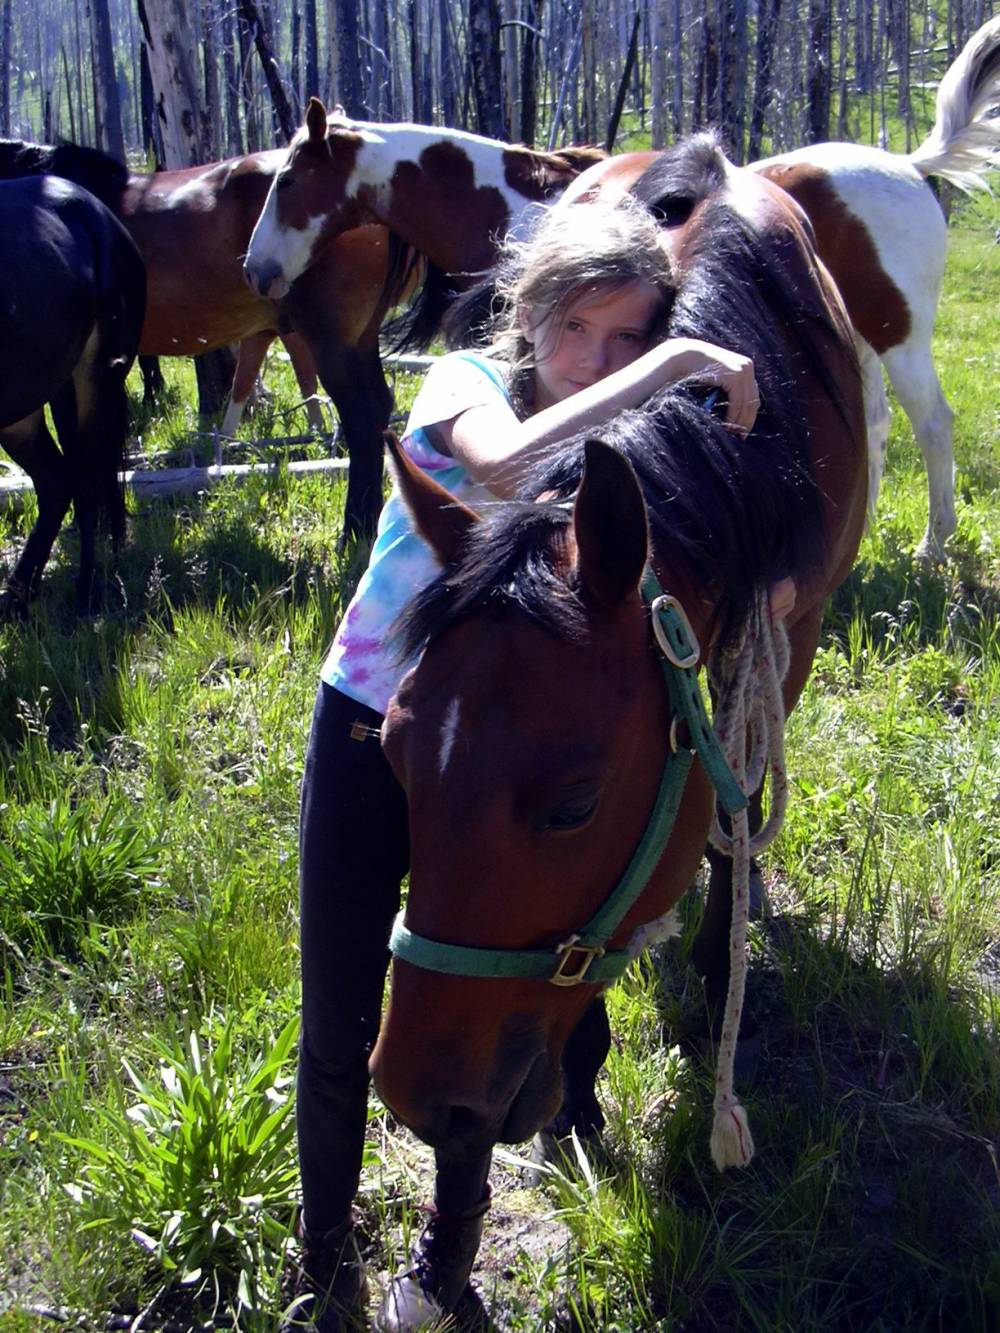 TOP WYOMING EQUESTRIAN CAMP: Bedroll and Breakfast is a Top Equestrian Summer Camp located in Jackson Wyoming offering many fun and enriching Equestrian and other camp programs. 